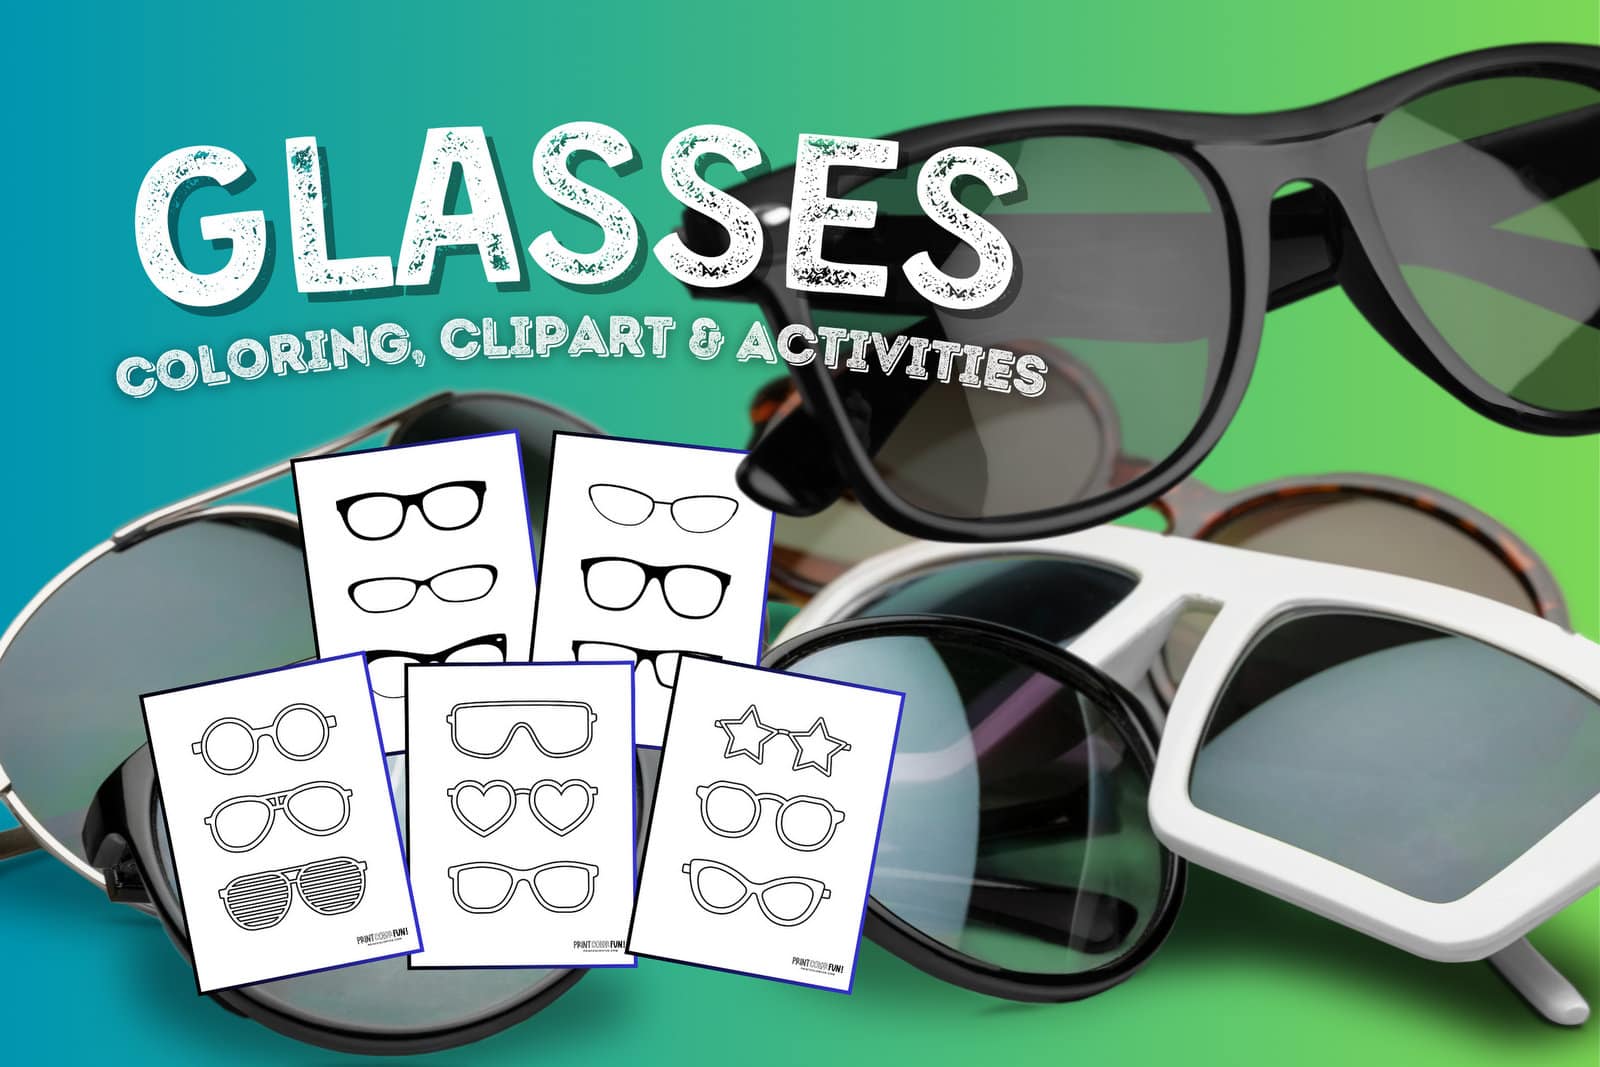 Eye glasses and sunglasses coloring page clipart activities from PrintColorFun com